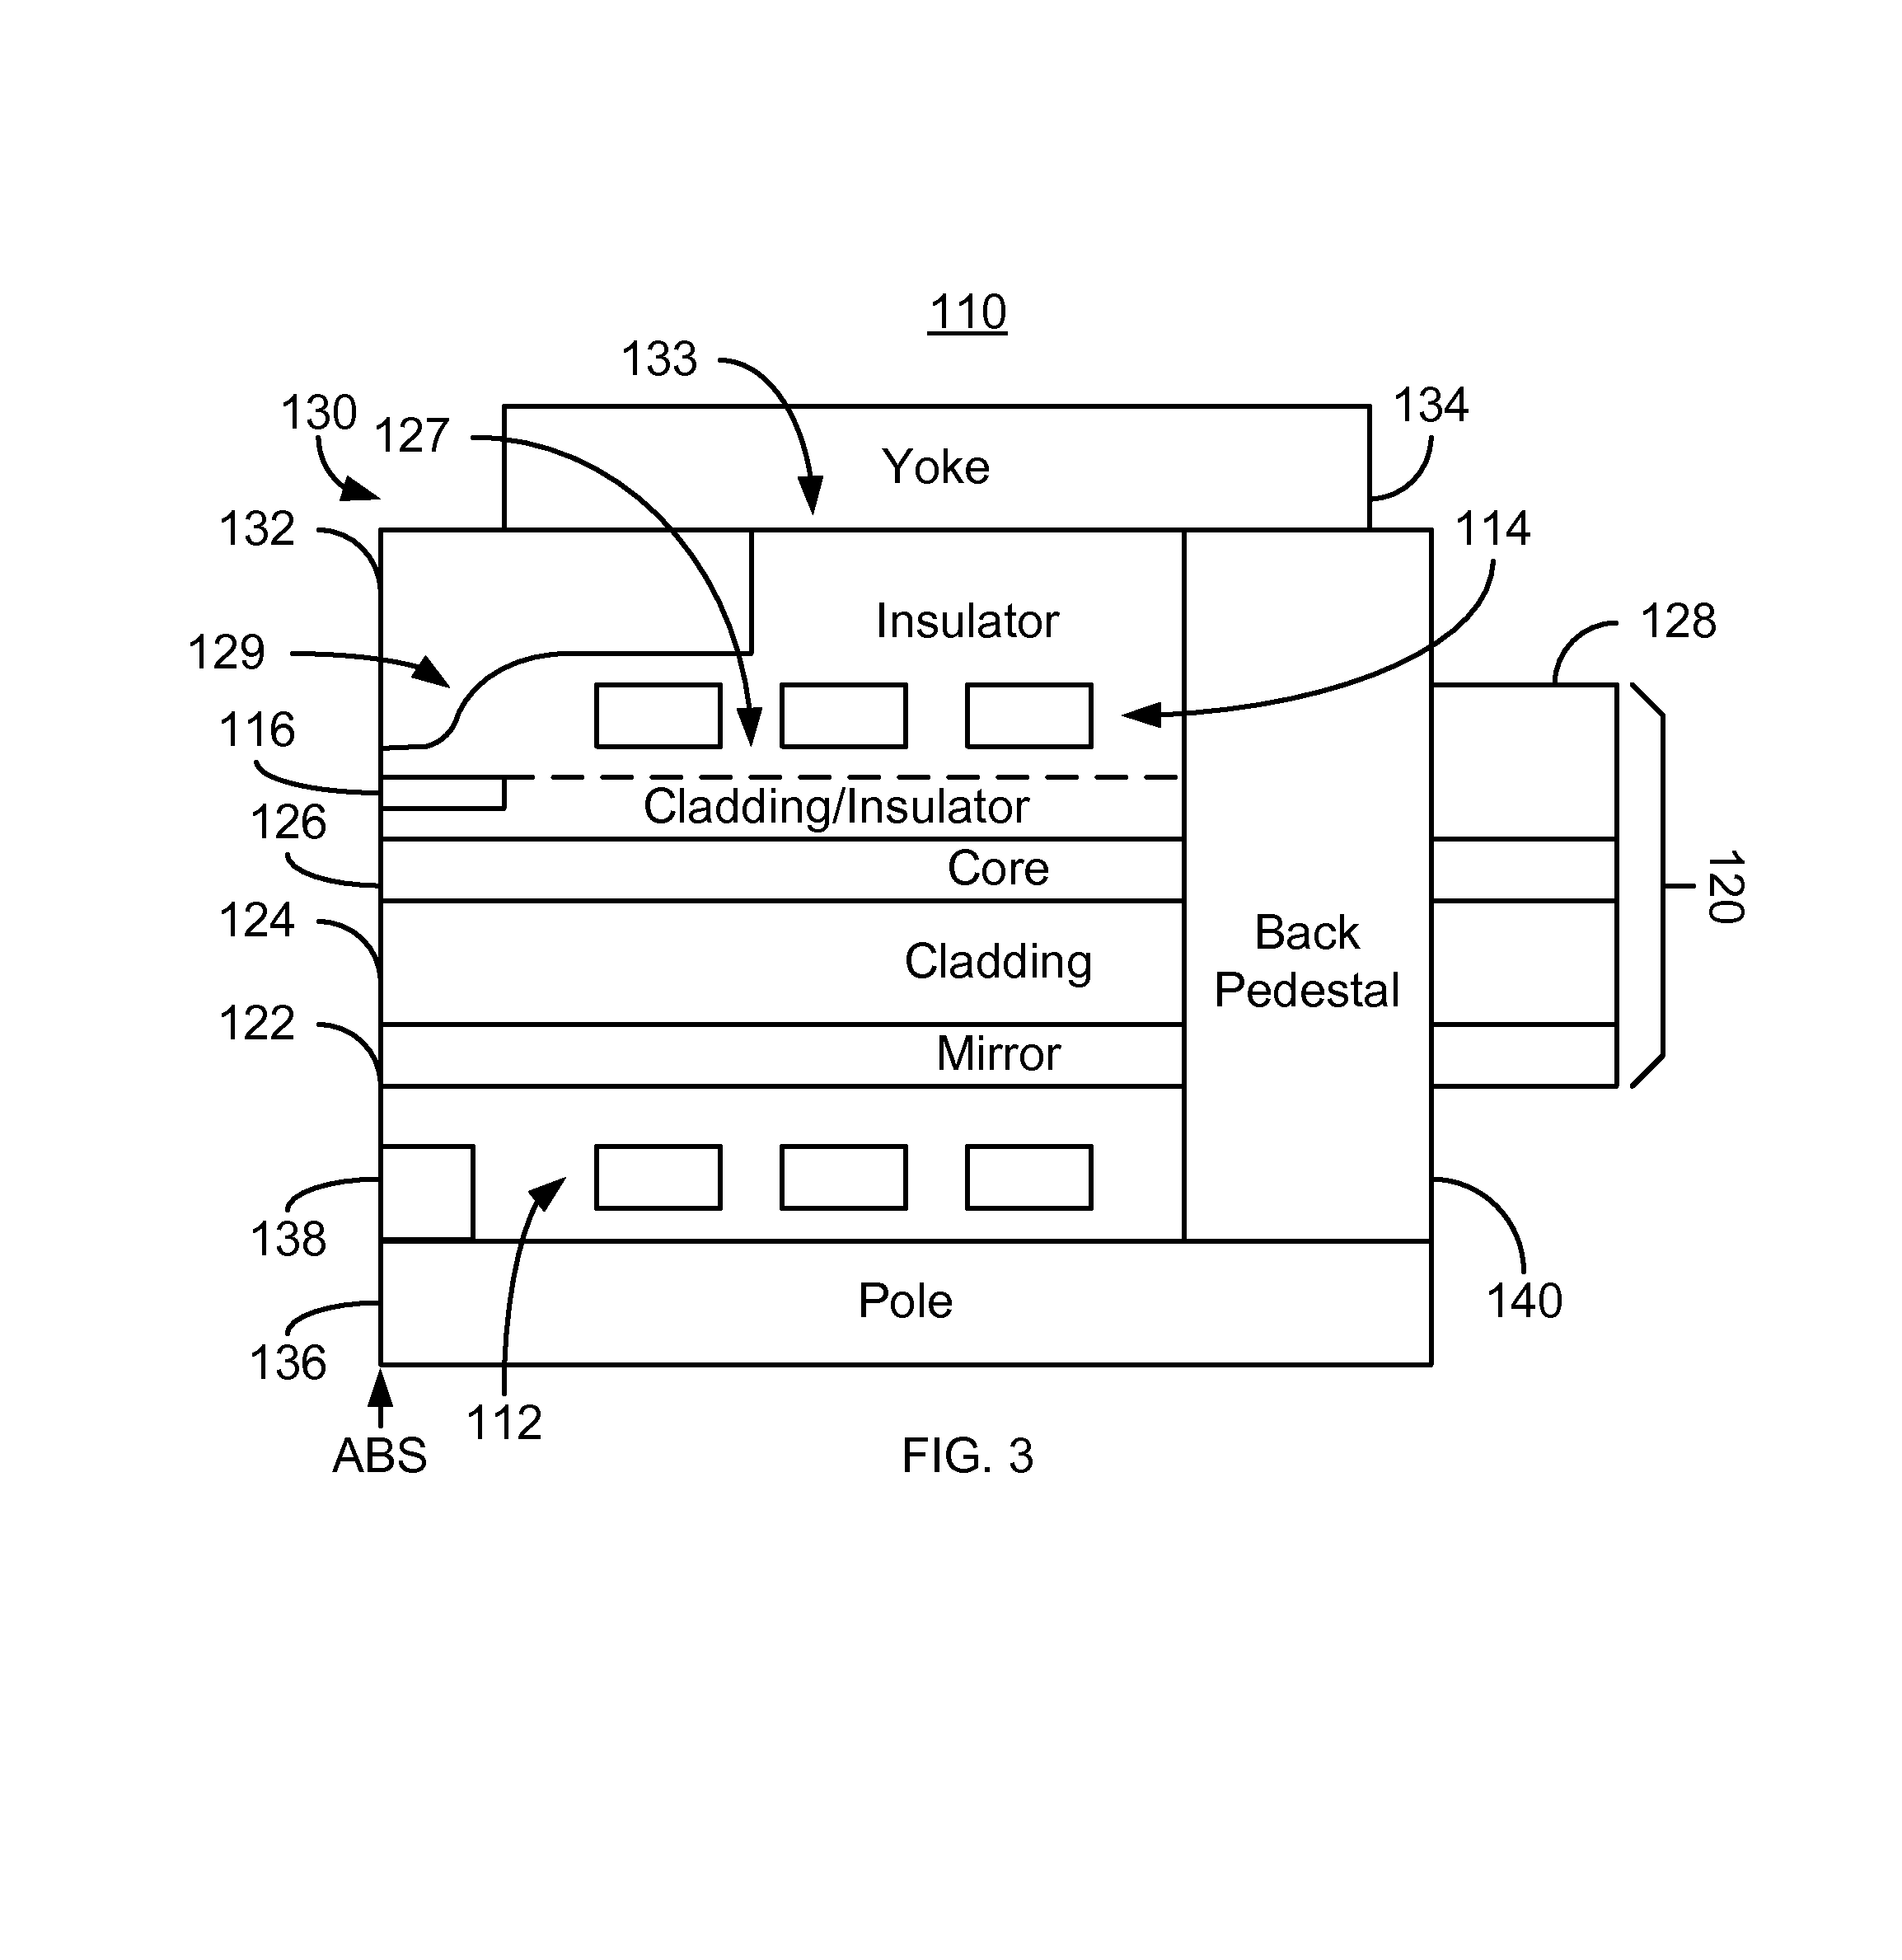 Method and system for providing a magnetic recording transducer having a planarized near-field transducer and a sloped pole